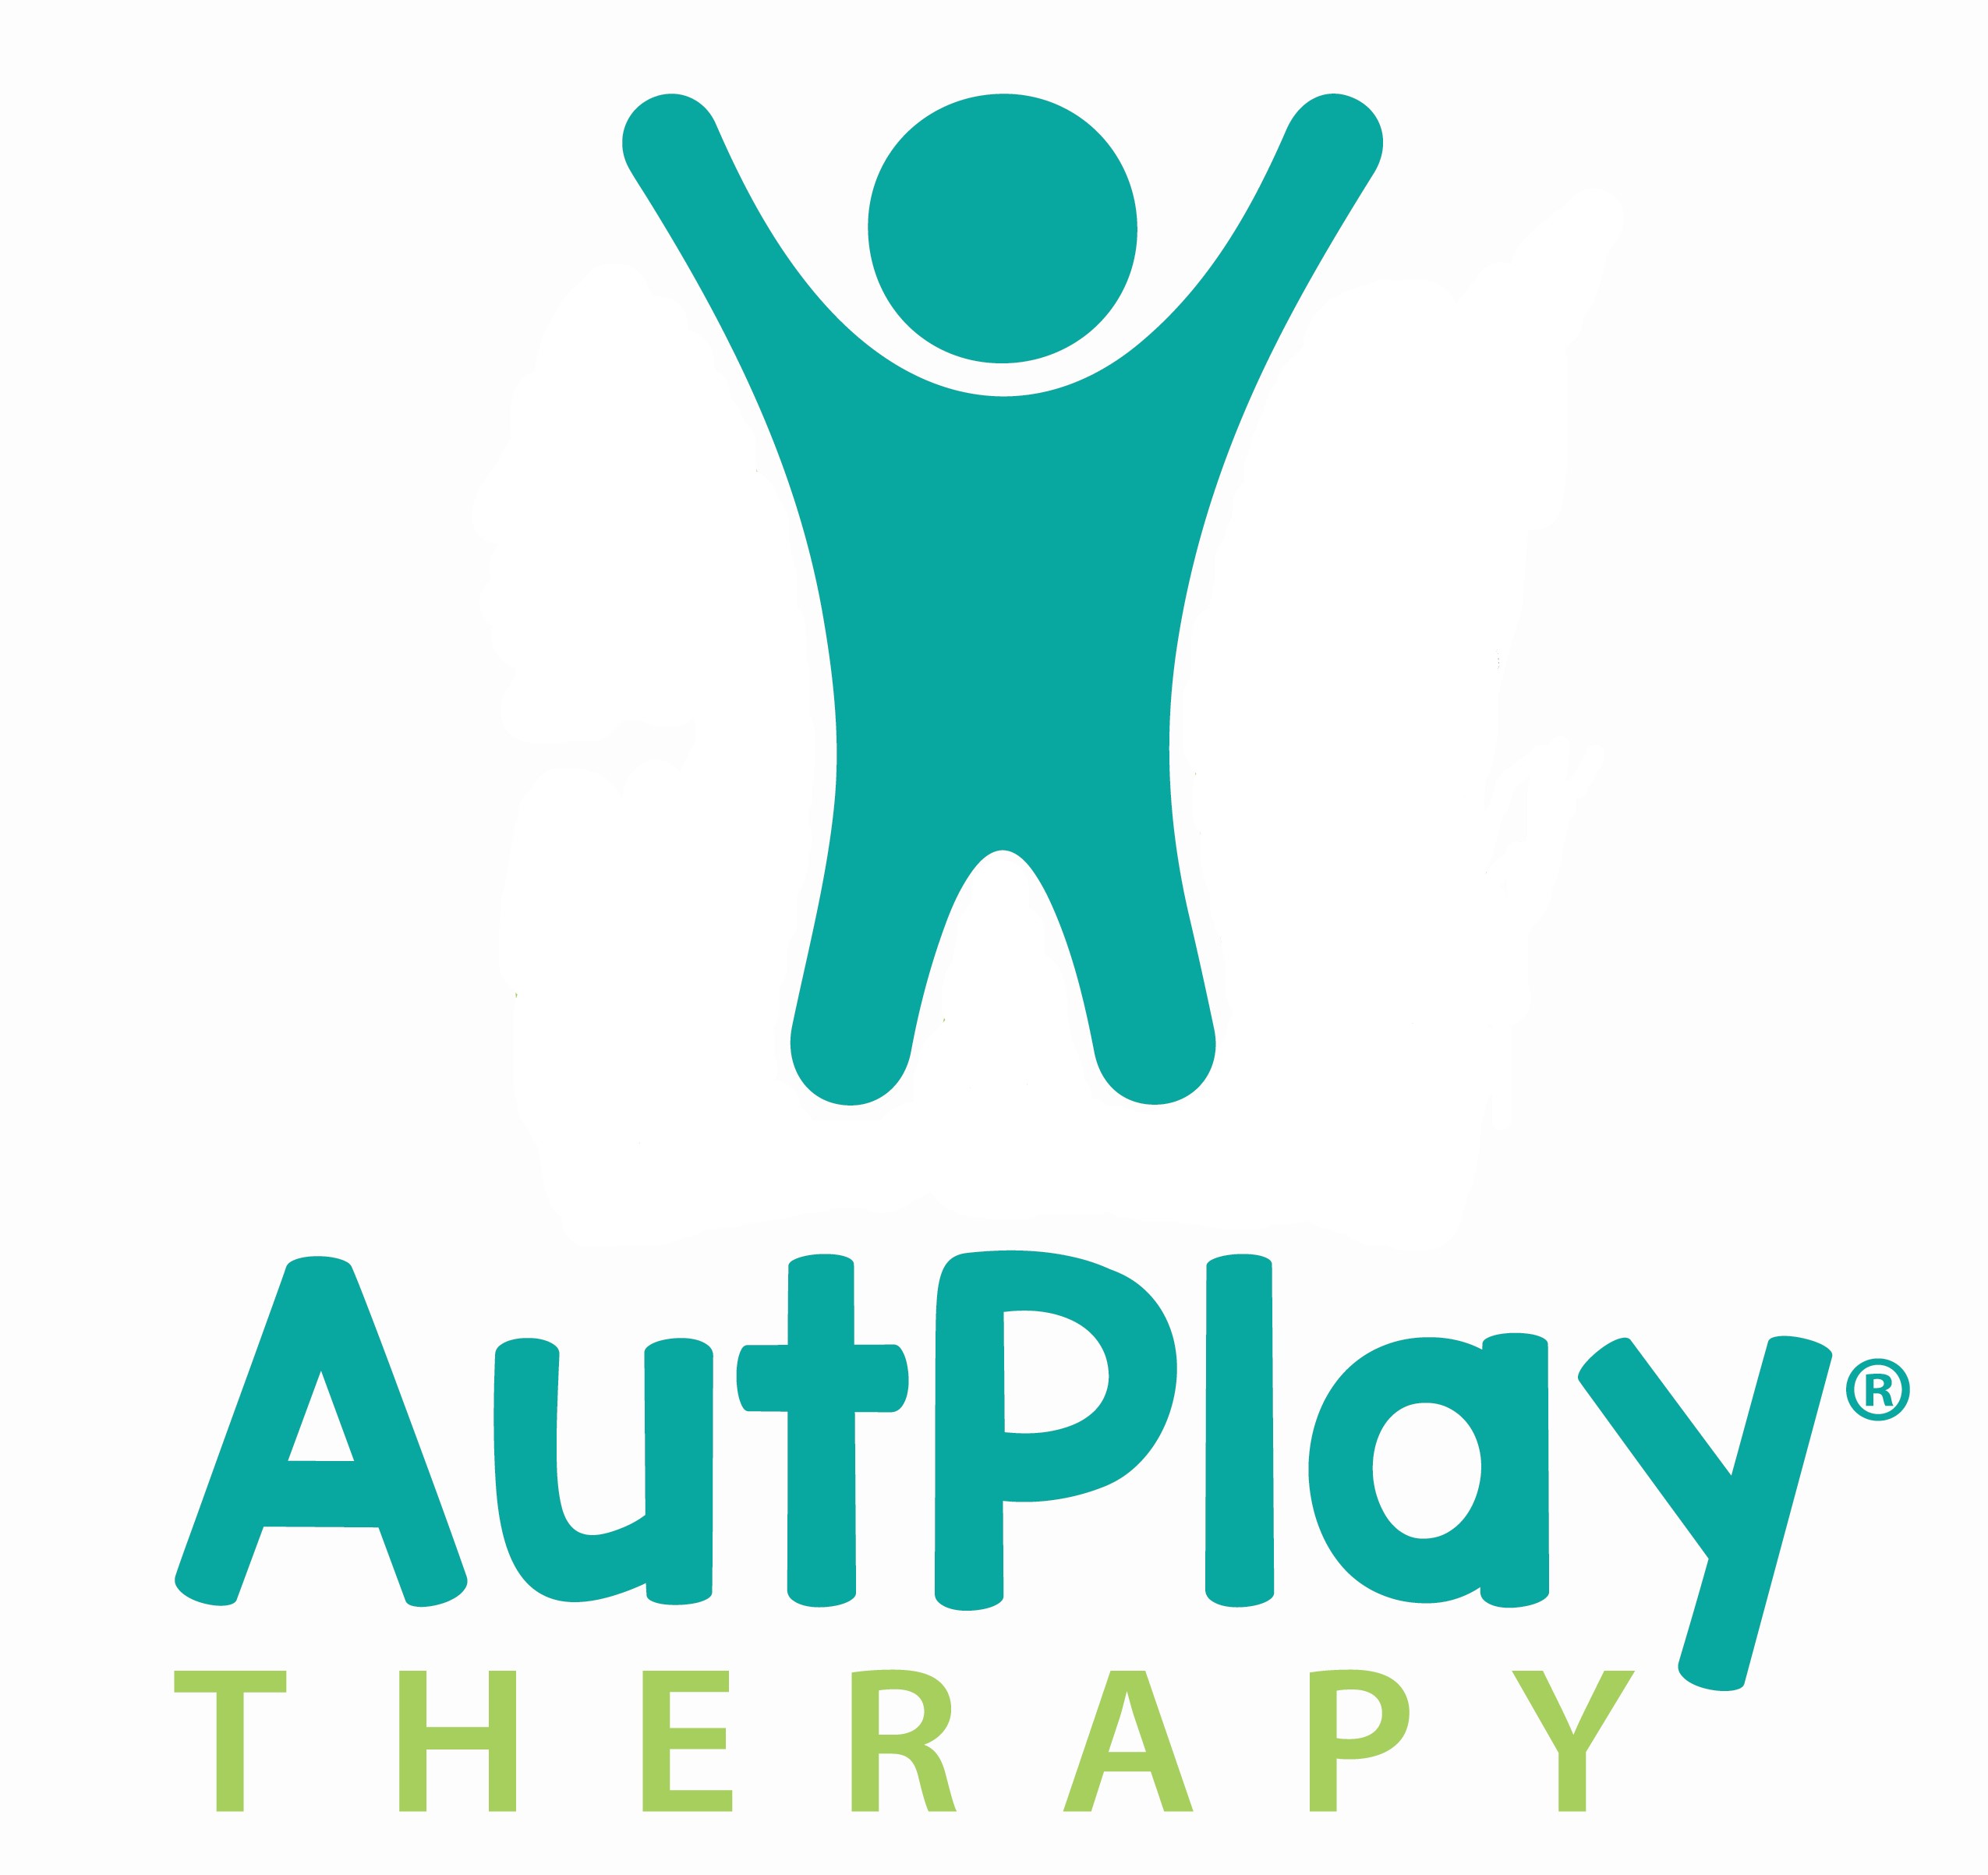 Turquoise body with arms up and turquoise word AutPlay, and green word Therapy